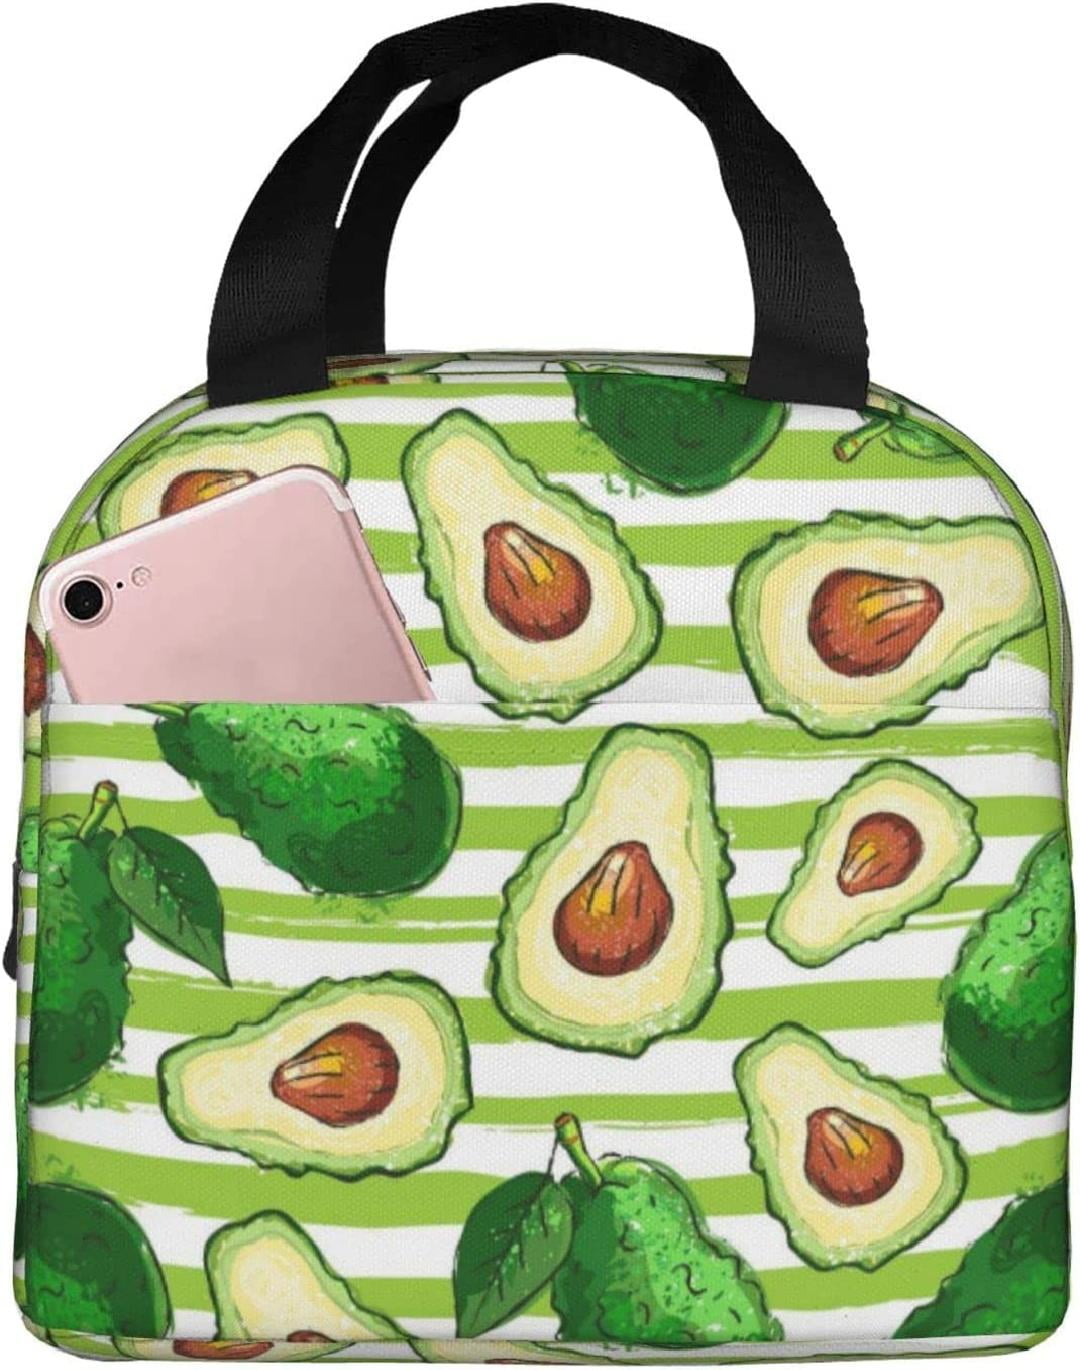 Avocado Lunch Bag Insulated Lunch Bag Summer Fruit with Front Pocket ...